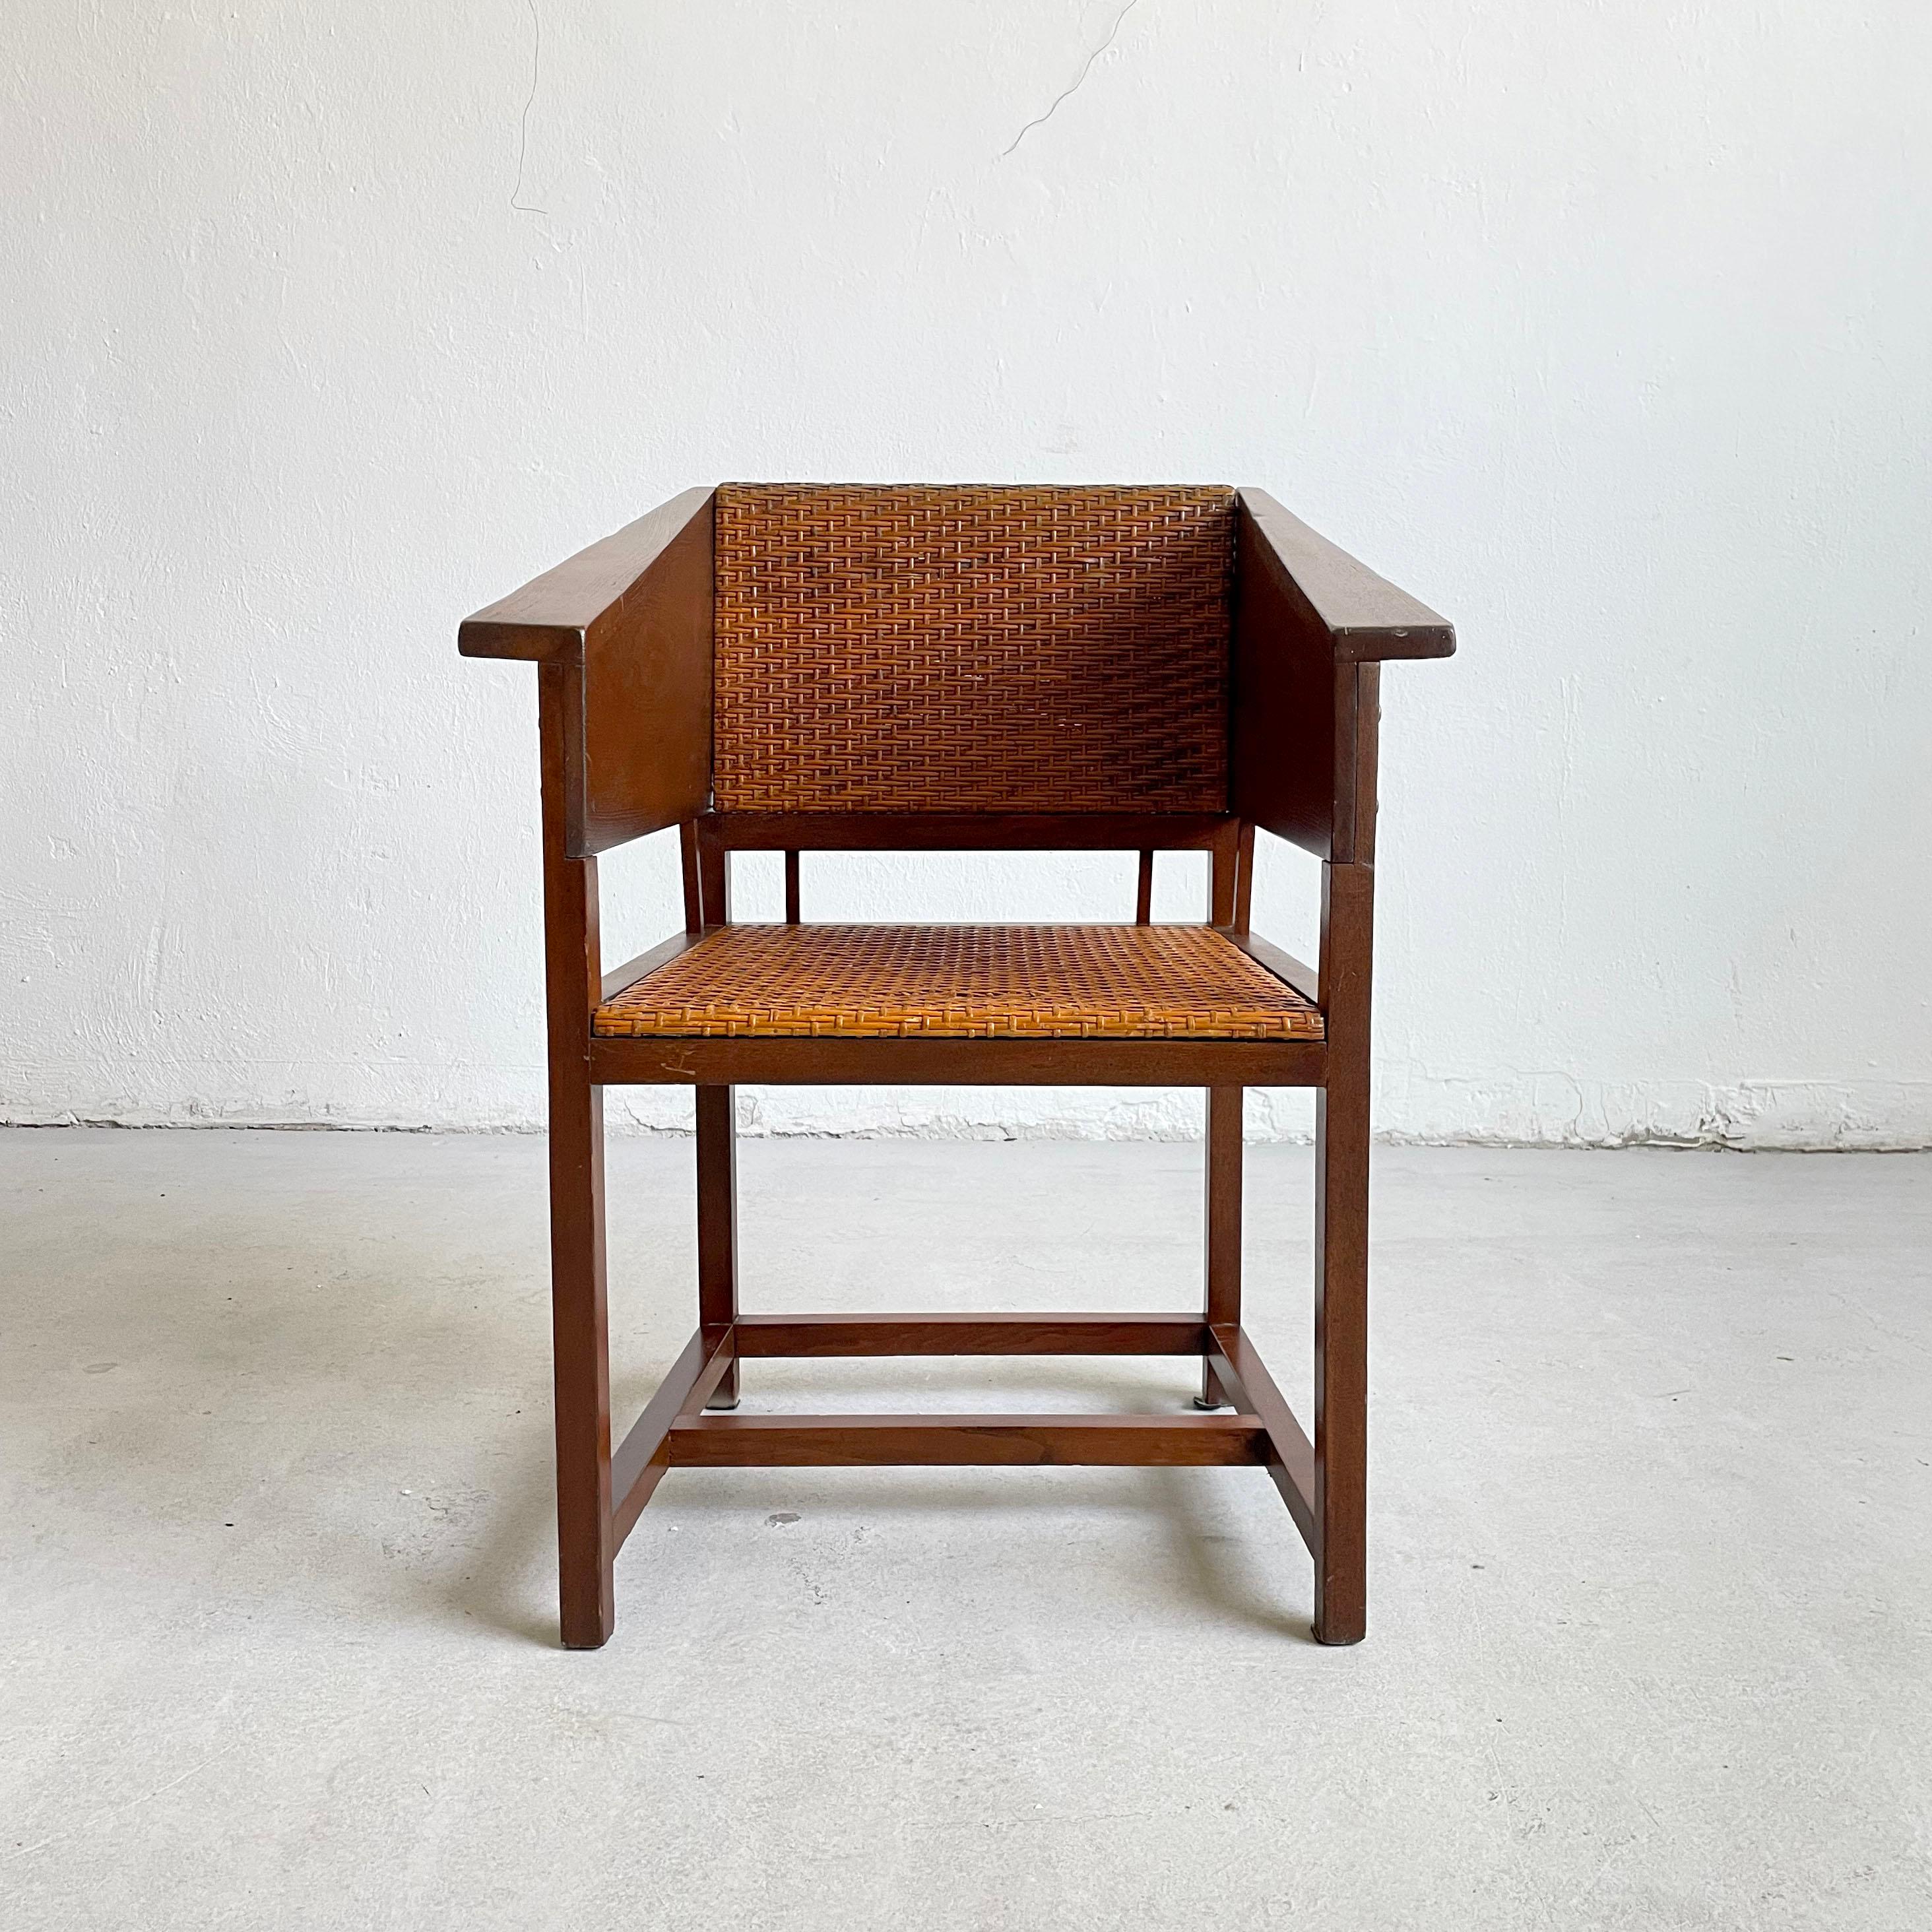 HANS VOLLMER (1879-1946)
A Cane and Oak Armchair mod. 464, designed in 1902 and manufactured by Prag-Rudniker Korbfabrikation, Vienna

This rare chair featuring a geometric form is a fine example of the aesthetics of Vienna